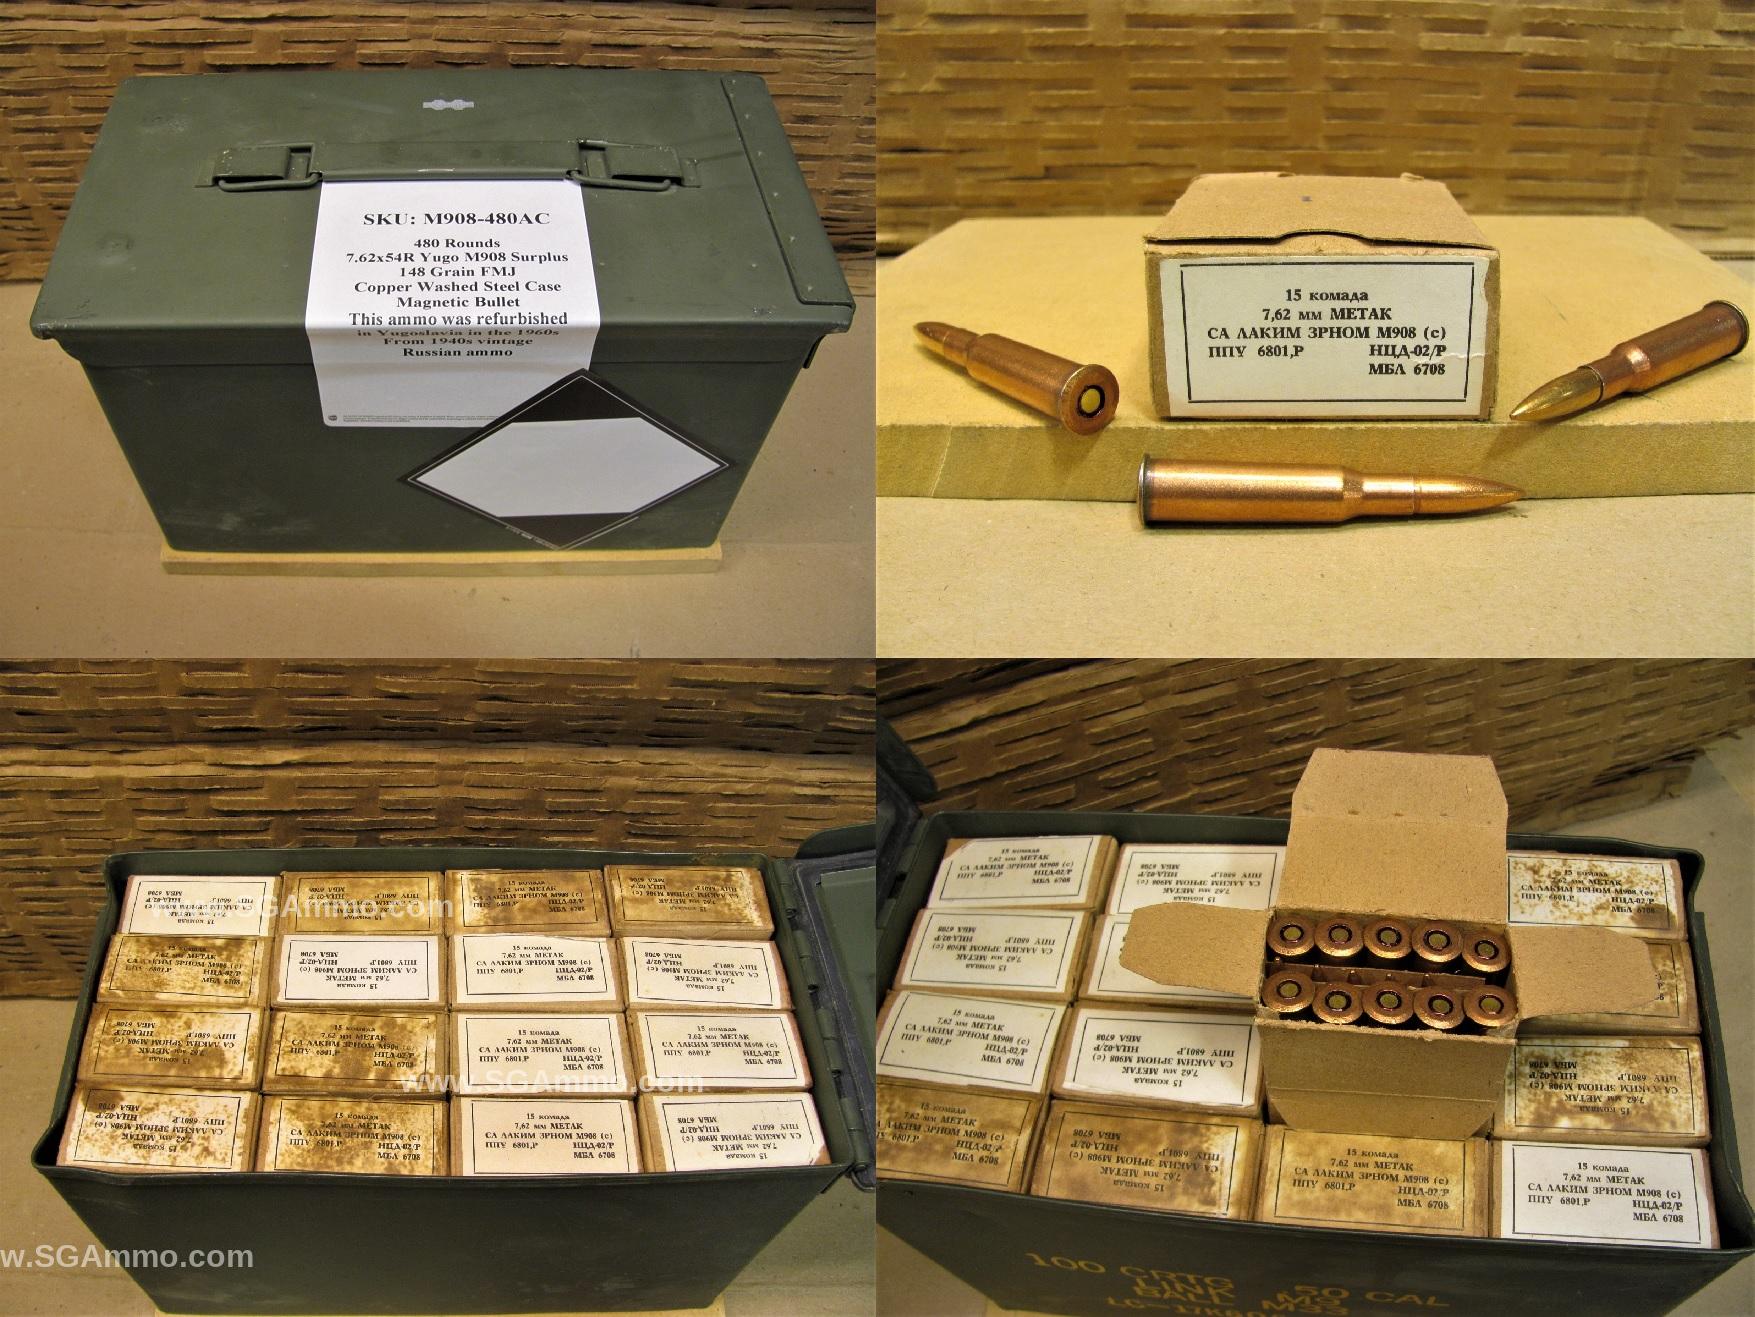 480 Round Can - 7.62x54R 148 Grain FMJ Yugo M908 Surplus Copper Washed Steel Case Ammo - Packed in Metal Canister